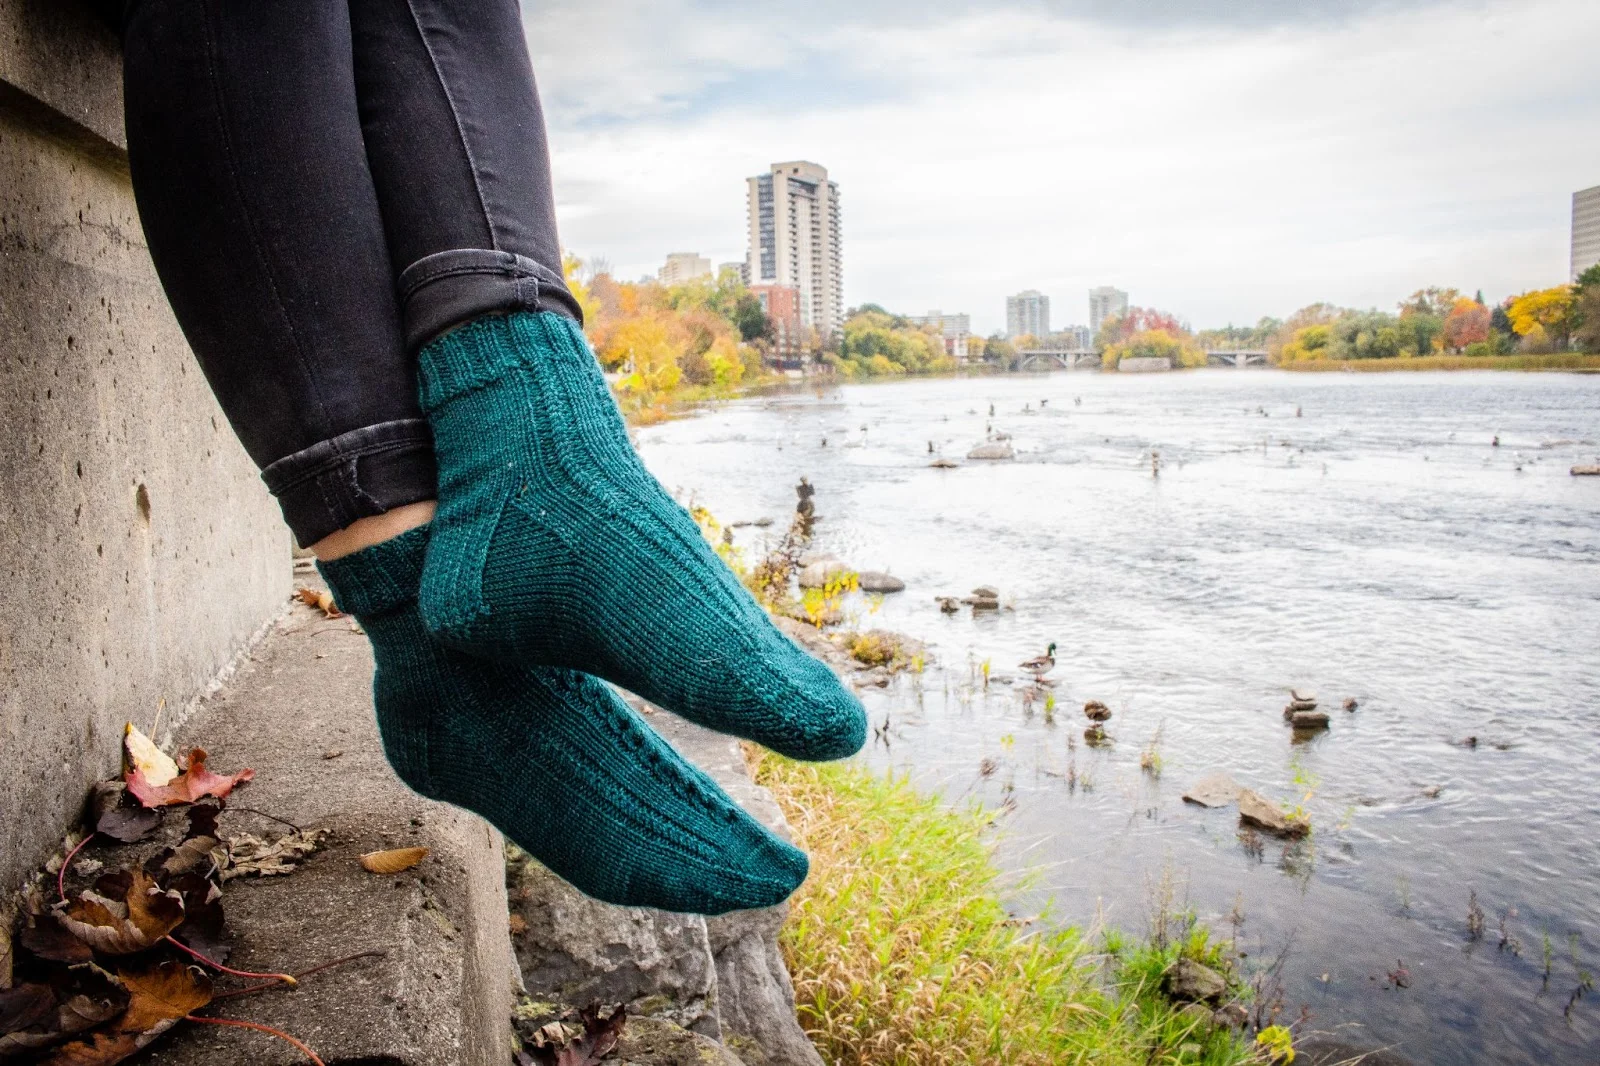 A pair of turquoise handknit socks with delicate cabled details are modeled by a woman sitting next to a river. Her legs are crossed at the ankles and the photo ends just below her knees.